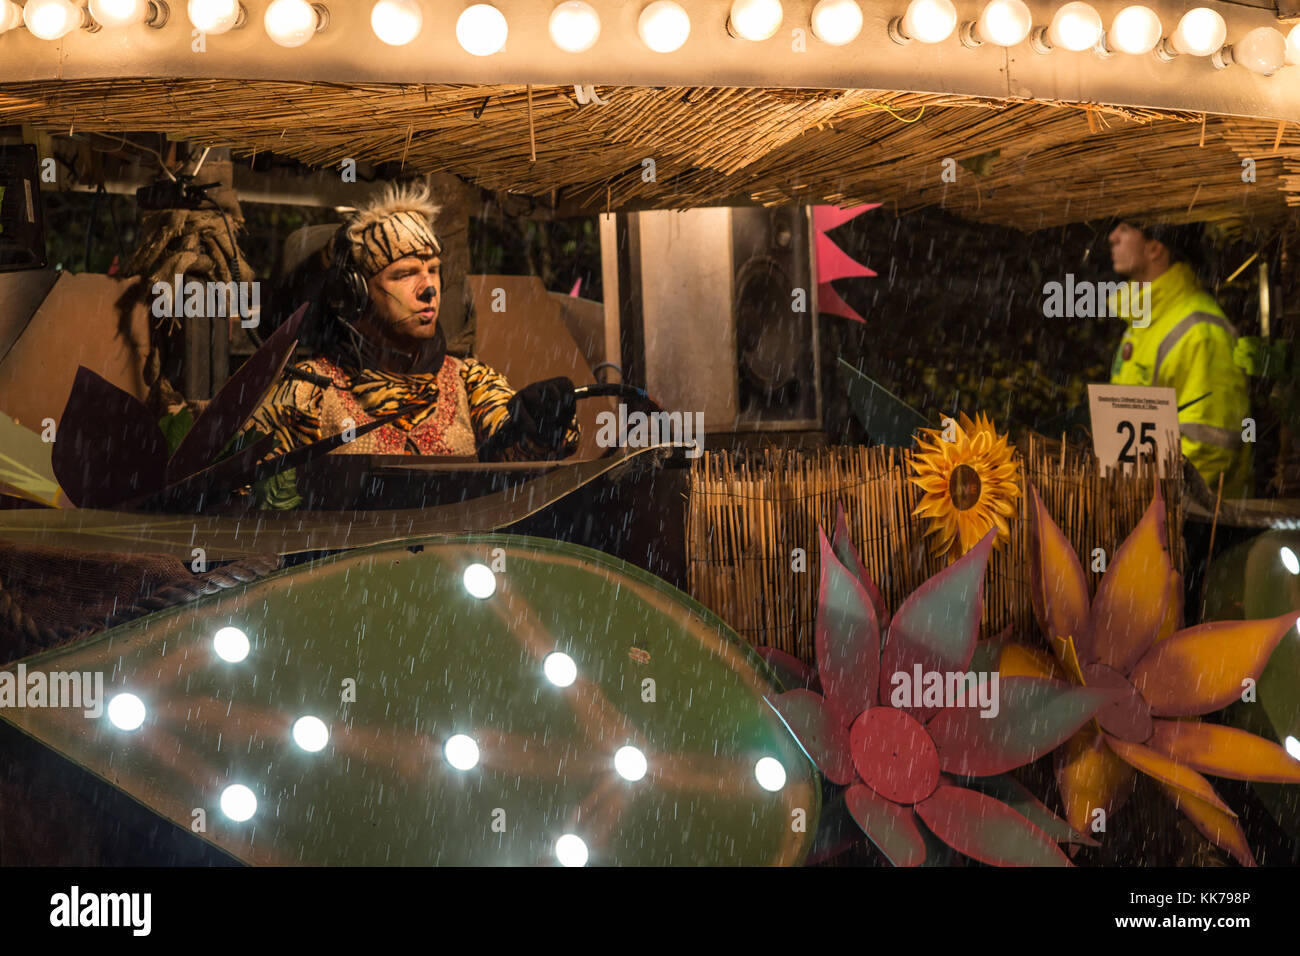 Glastonbury, United Kingdom, on the evening of the 18th November 2017, Eclipse Carnival Club float 'The Adventures Of Mowgli' takes part in the Glasto Stock Photo